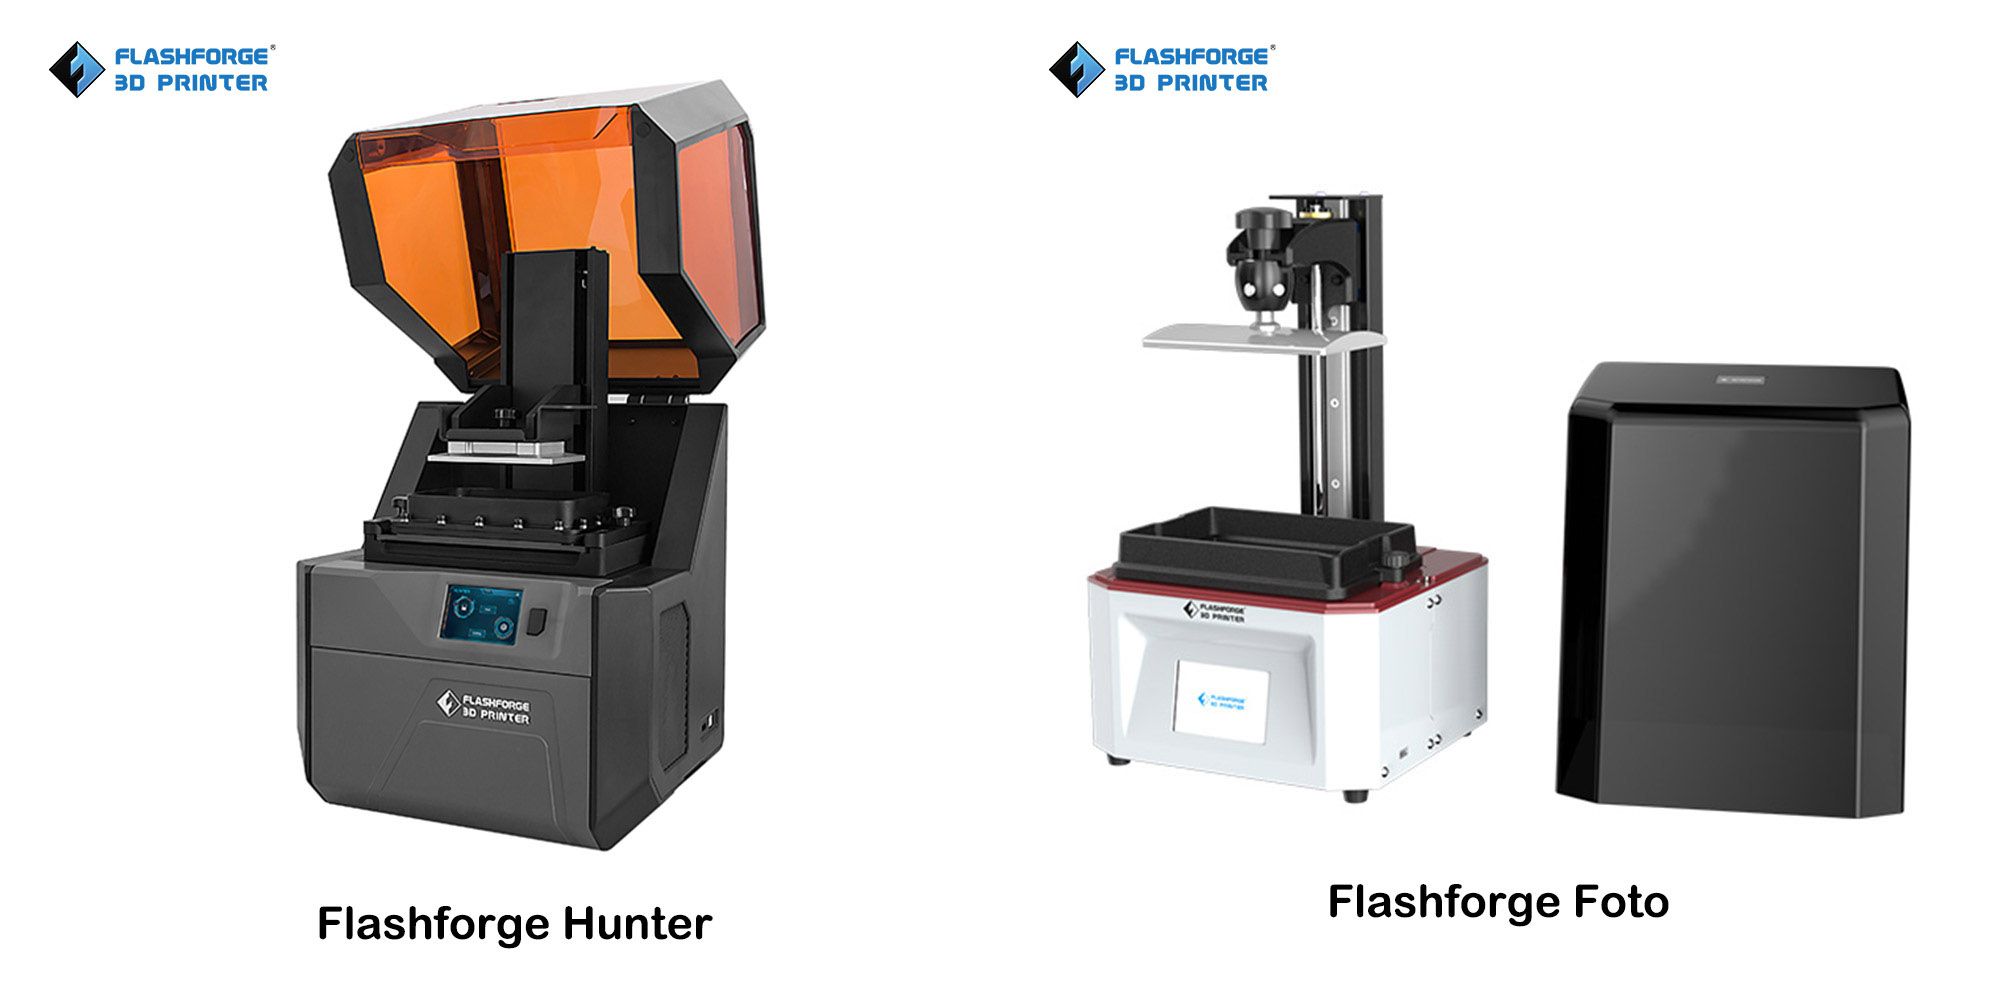 DLP and LCD 3D Printers, How Different Are They?